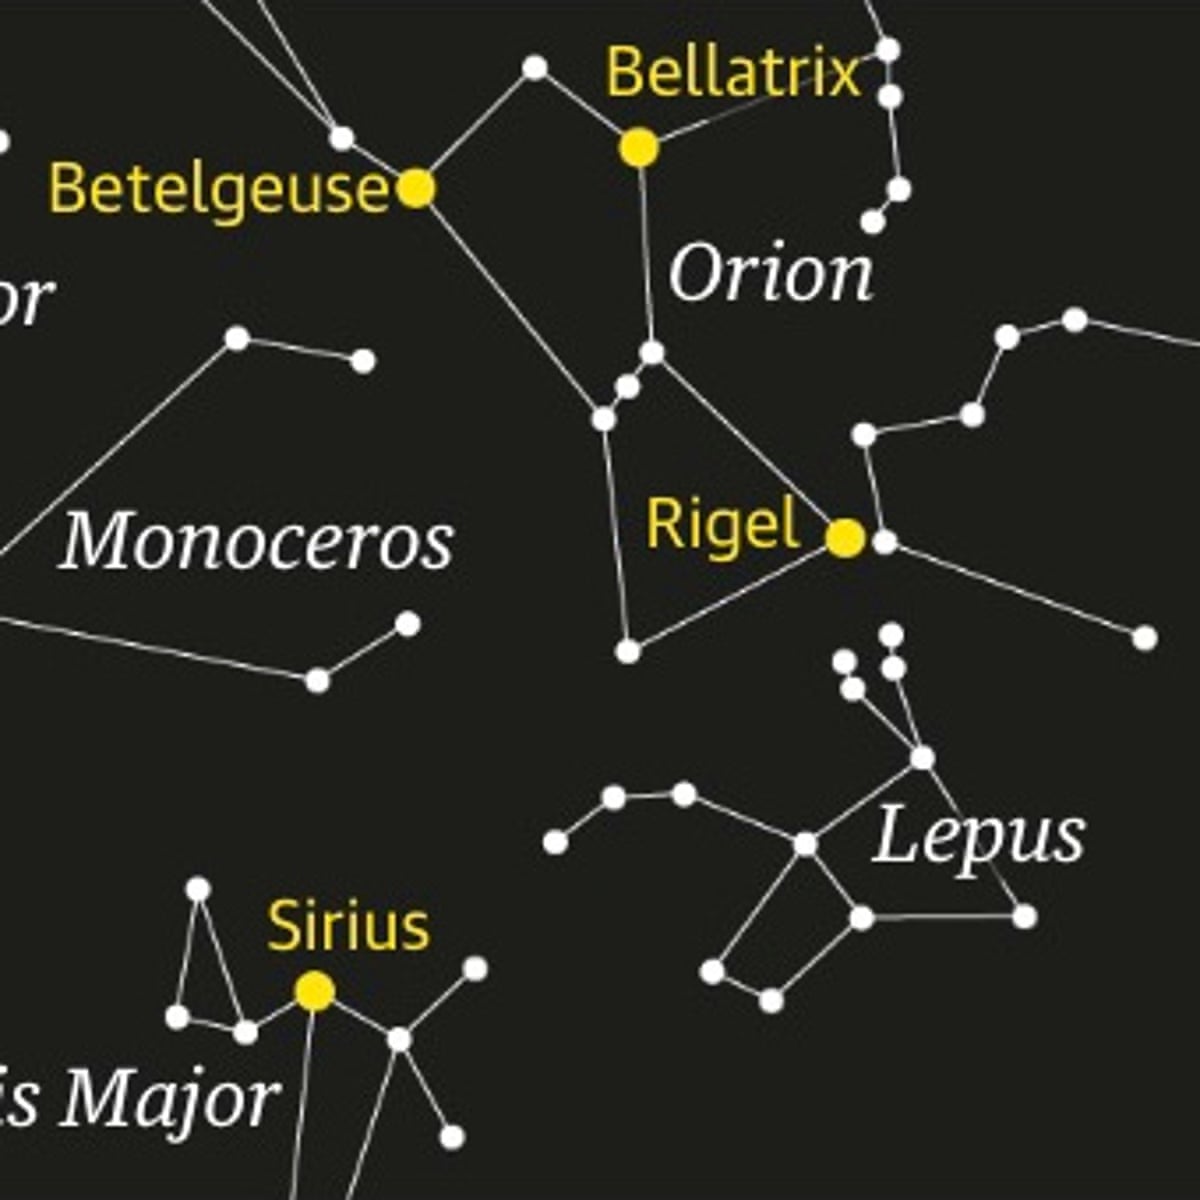 Starwatch: Sirius bright and beautiful in the pre-dawn sky, Astronomy